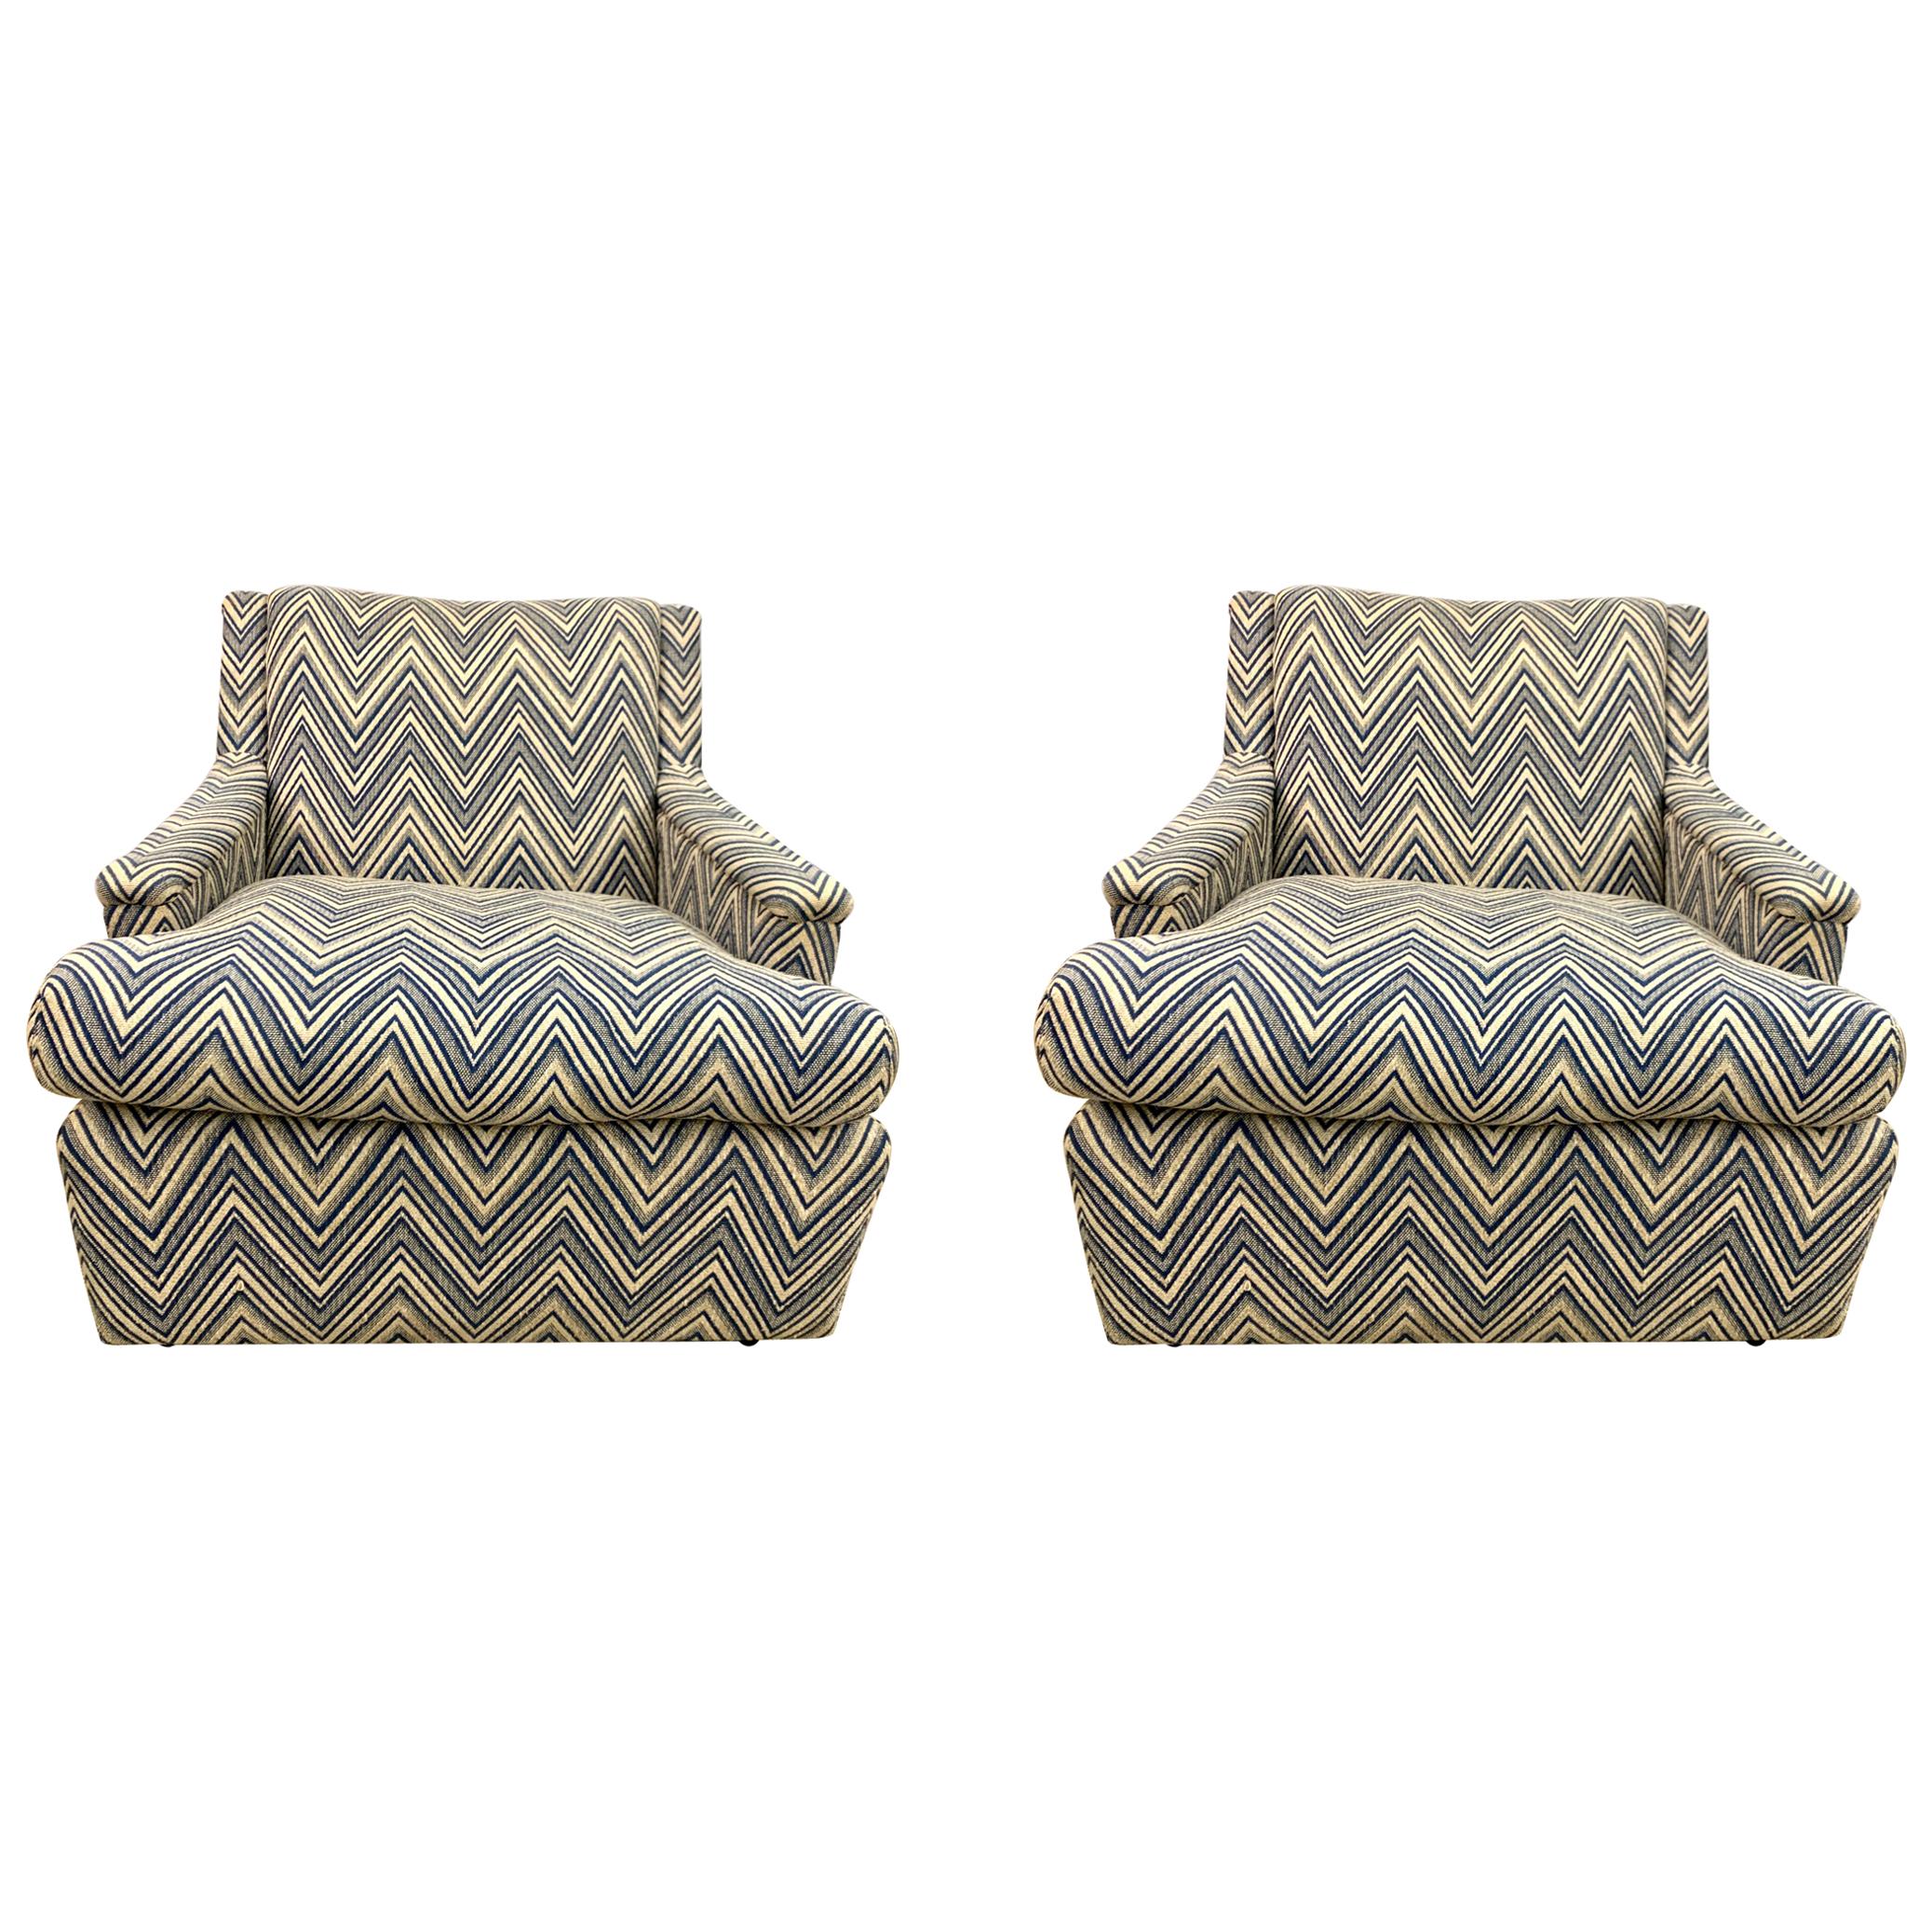 Matching Pair of Mid-Century Newly Upholstered Chevron Armchairs